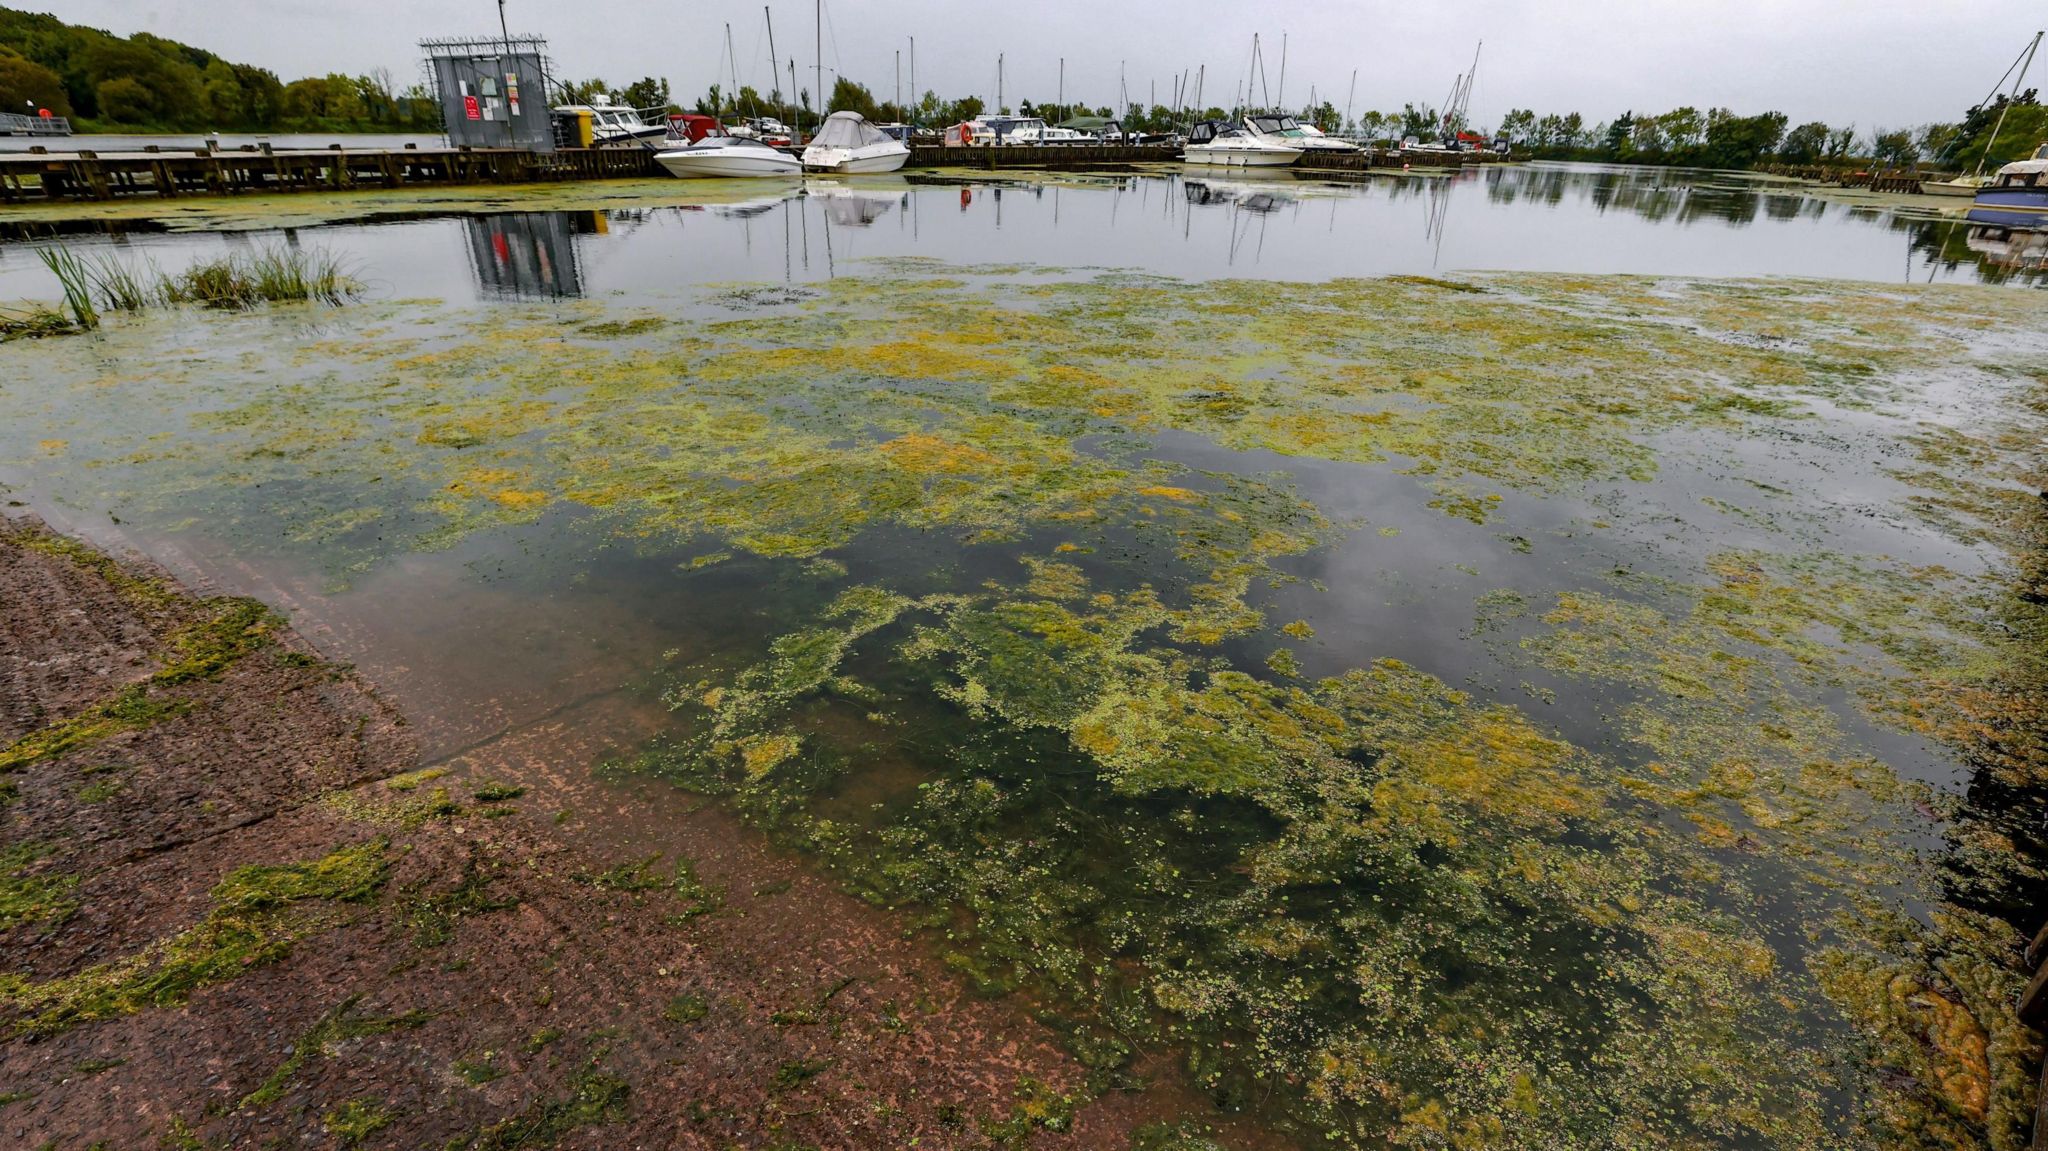 Blue-green algal blooms over the surface of Lough Neagh 